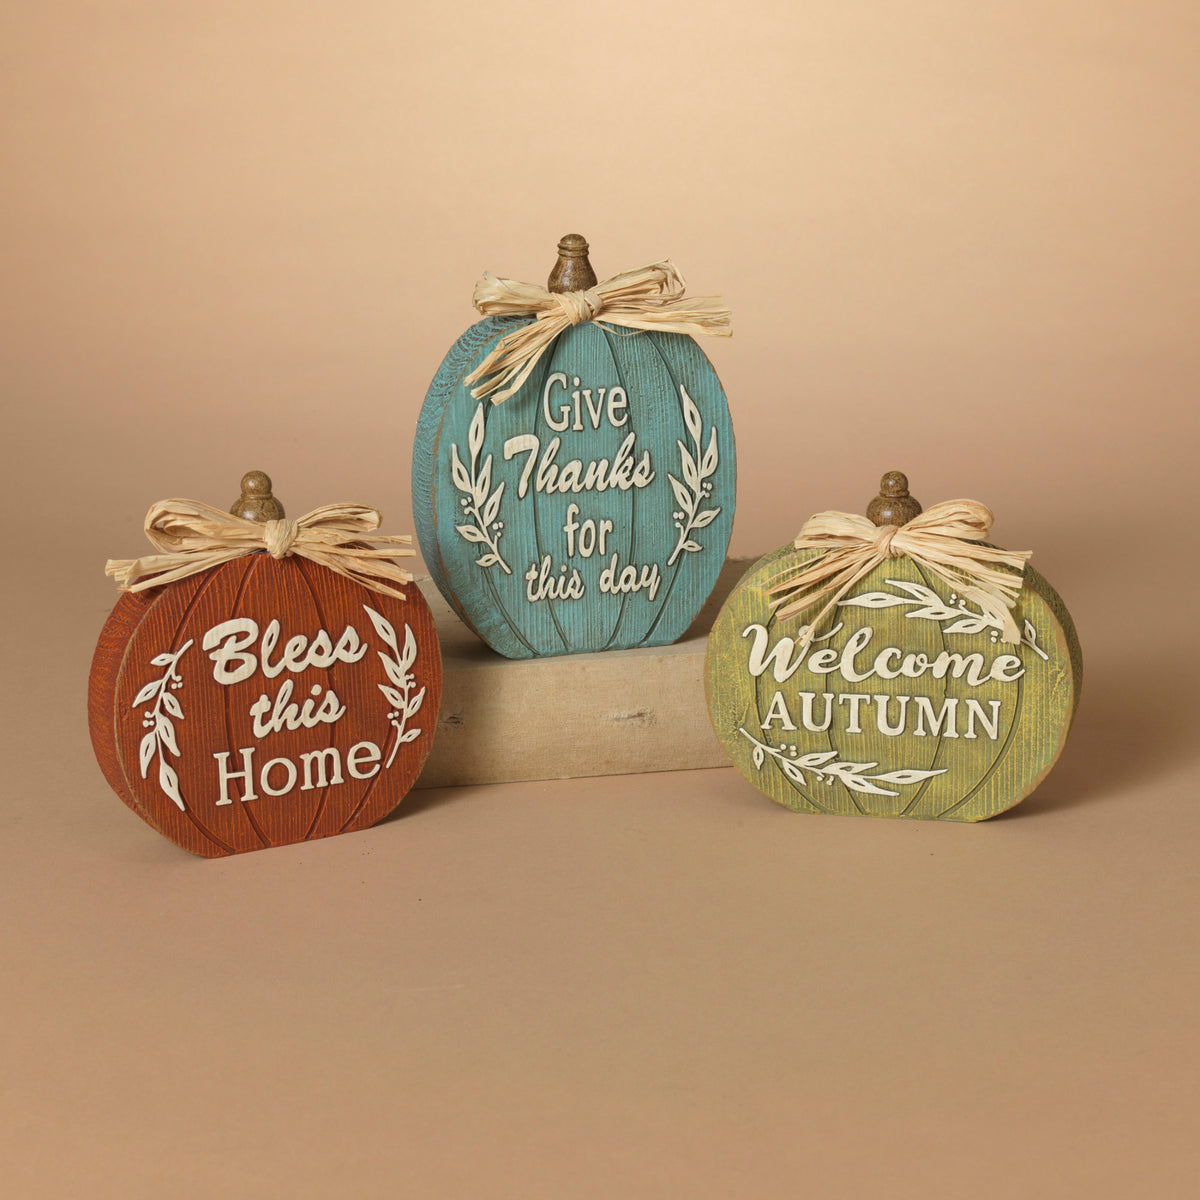 8.6"H Resin Harvest Pumpkins with Statements